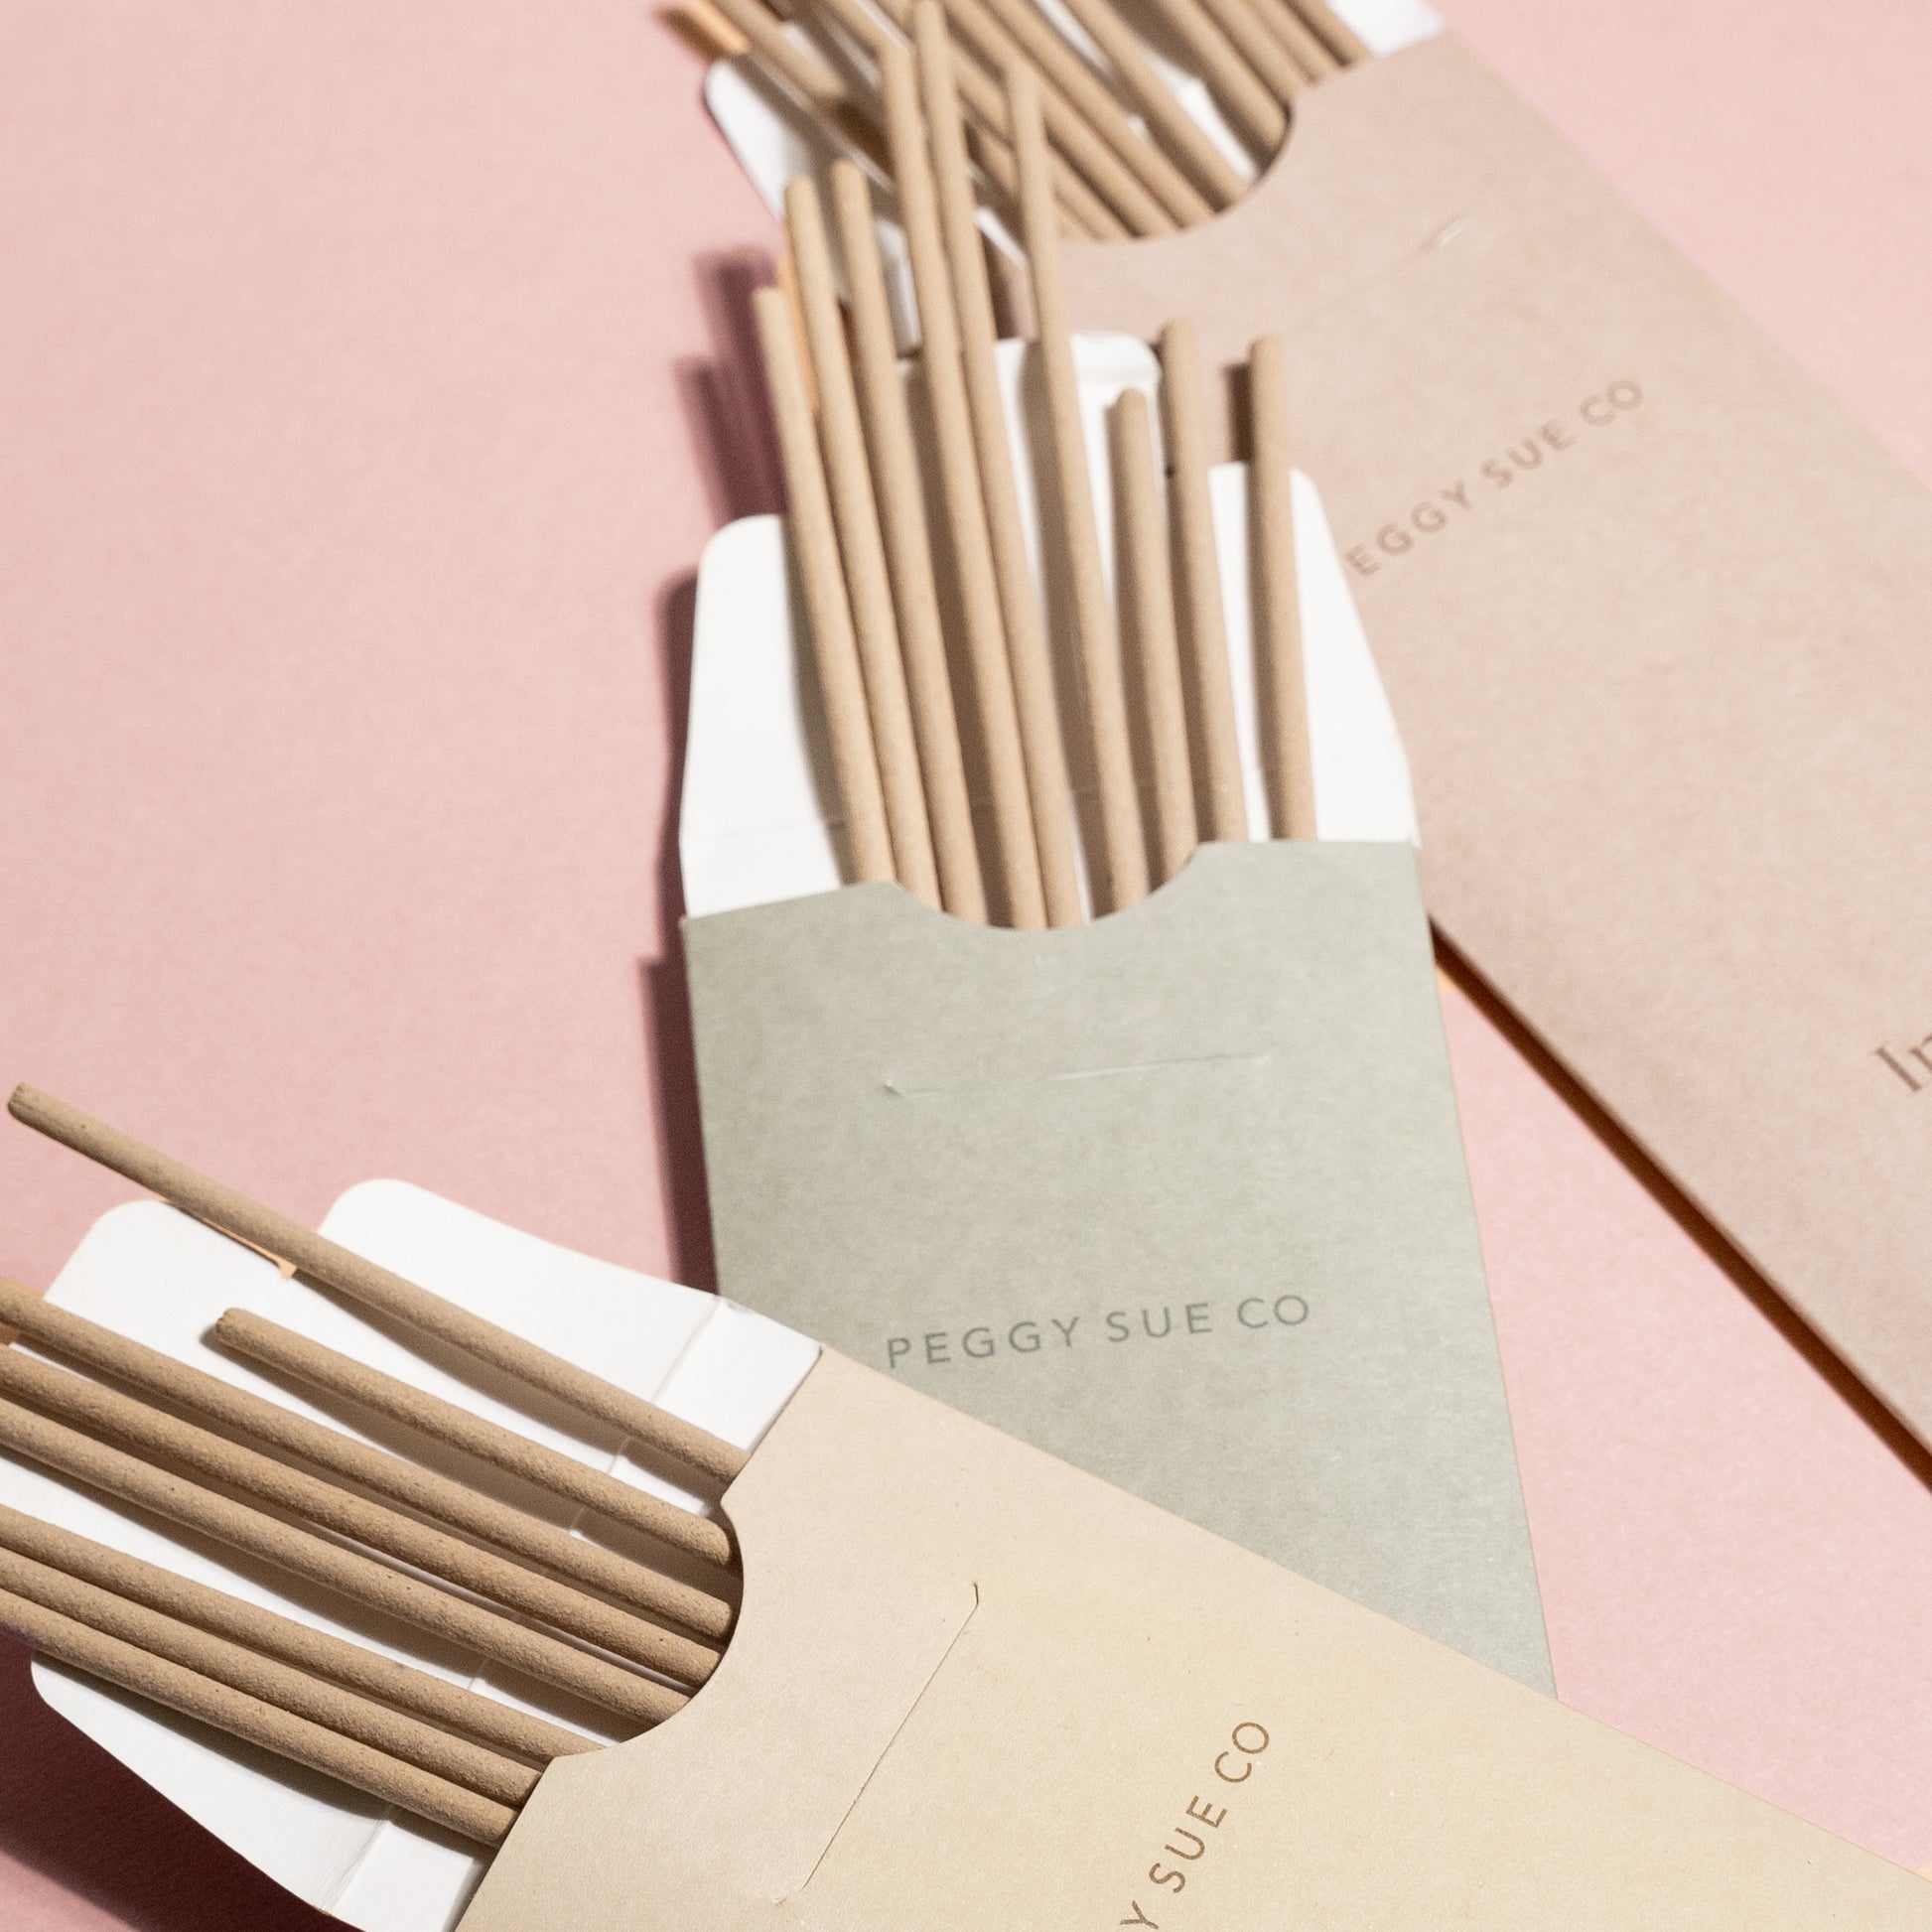 Our Calming Incense Sticks provide you with a beautiful aroma that resembles romance and love.   Each Incense Stick is made using natural wood powder and hosts essential oils of Jasmine + Bergamot, a scent that will soothe your soul as they calm your senses.